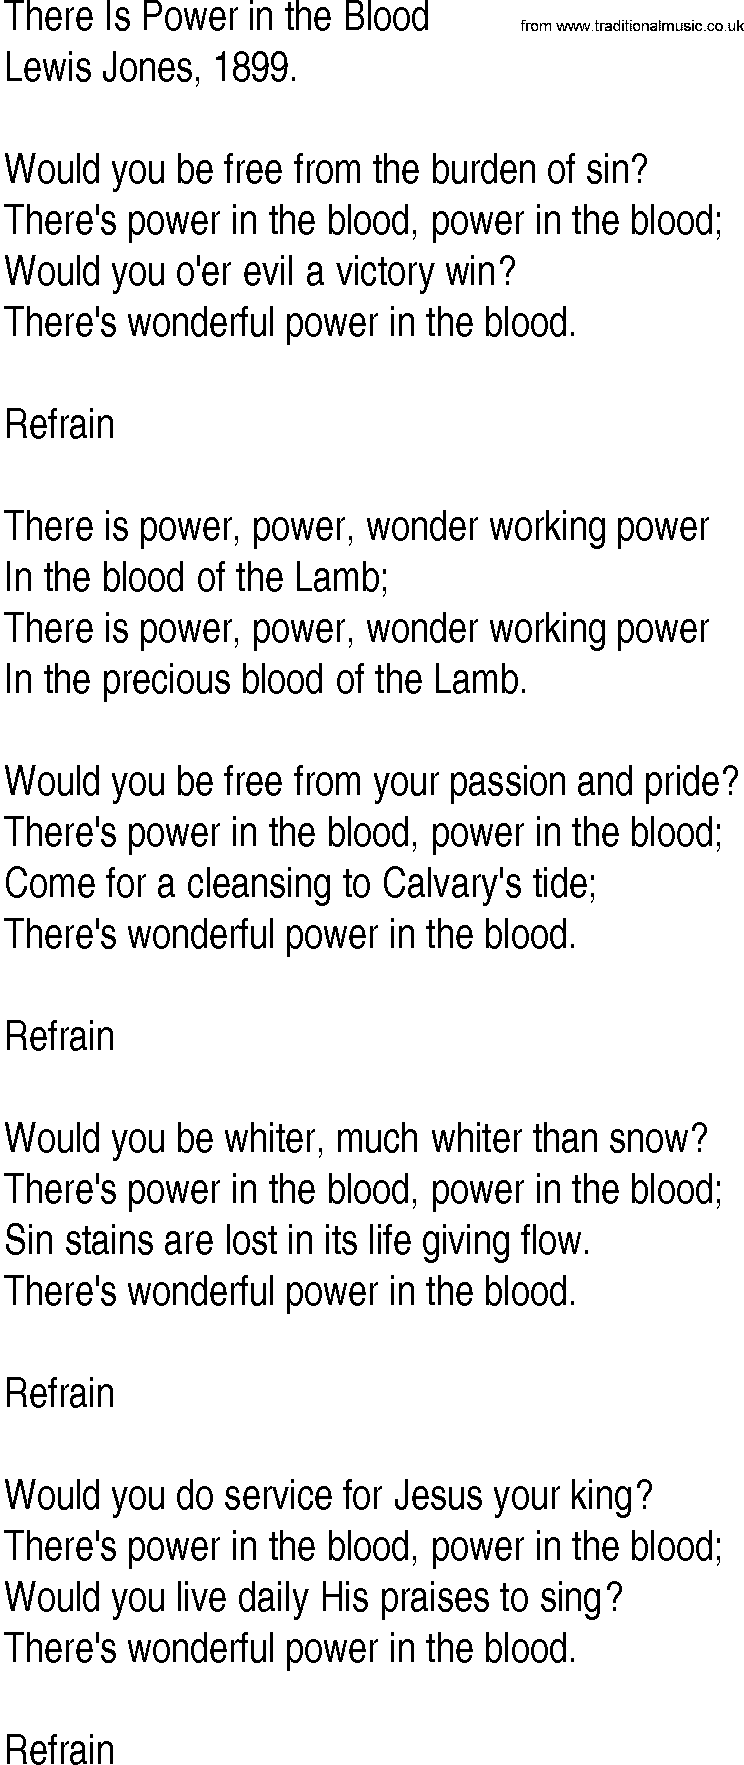 Hymn and Gospel Song: There Is Power in the Blood by Lewis Jones lyrics